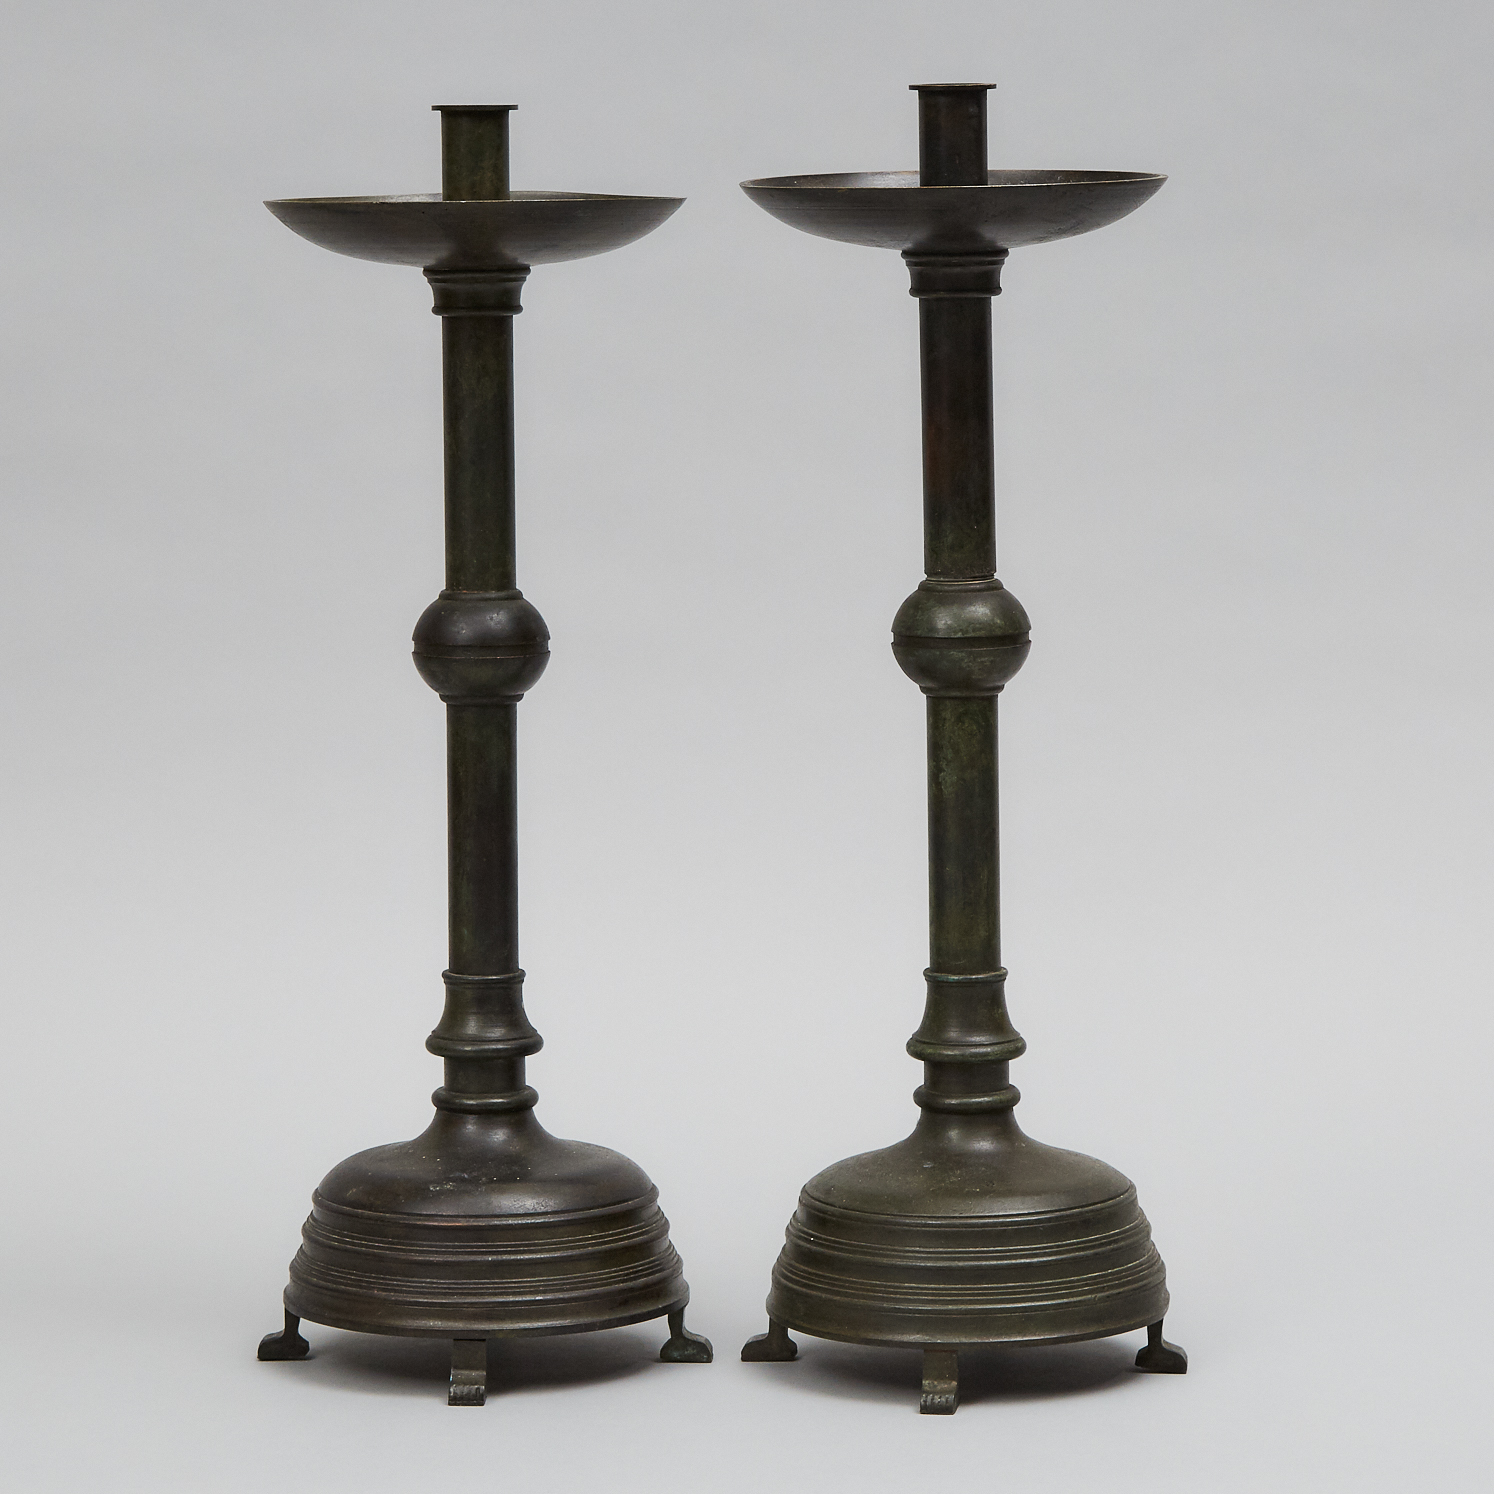 Pair of Tall Patinated Bronze Candlesticks, early 20th century